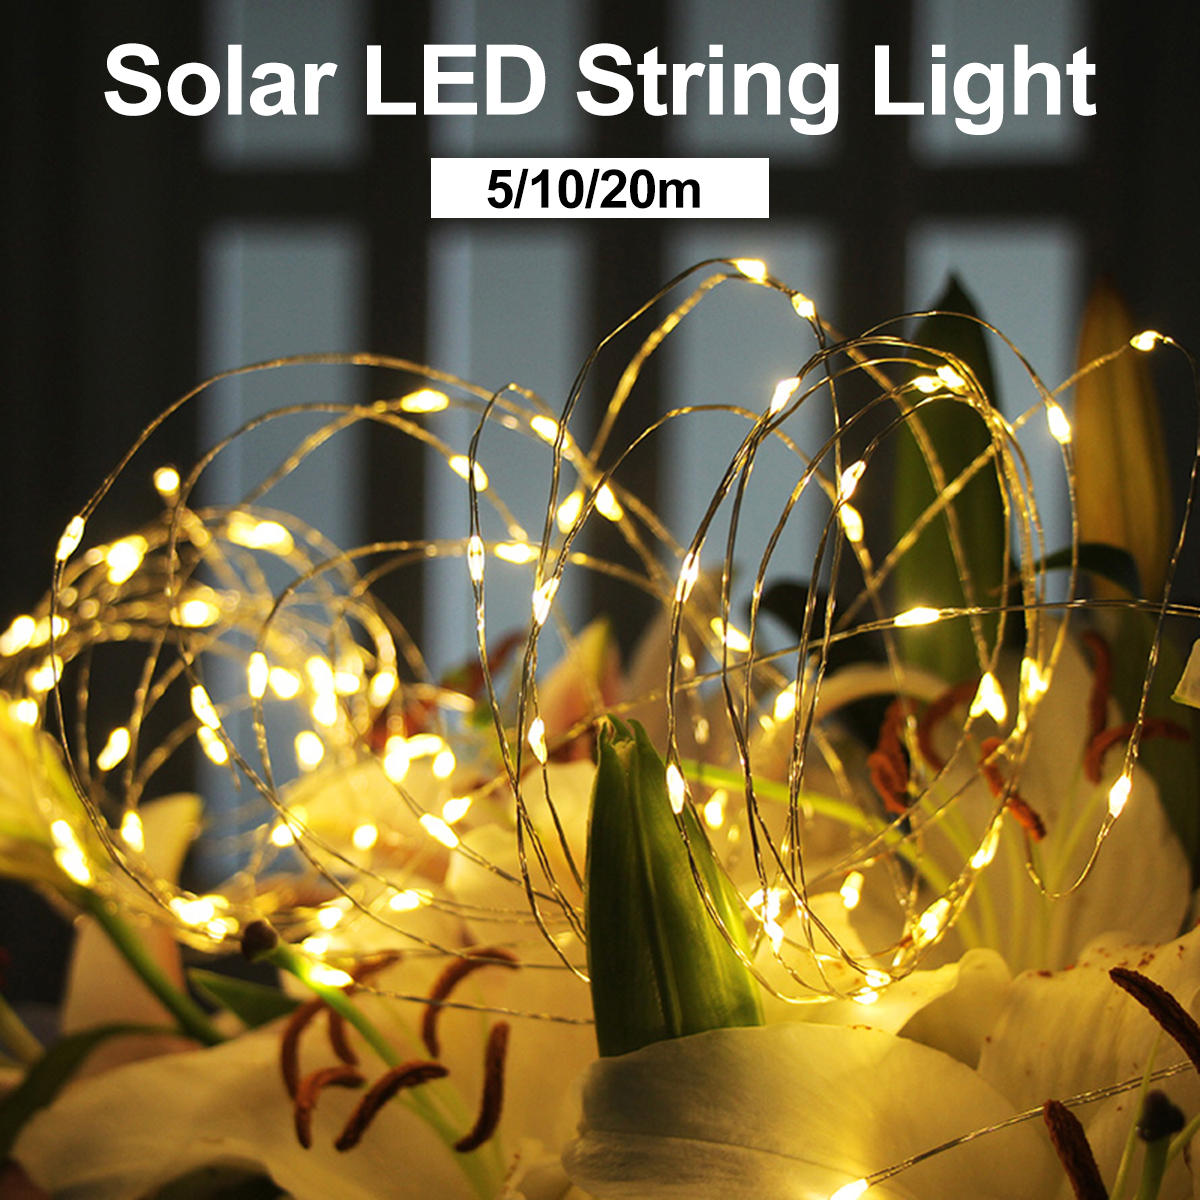 5M10M20M-Solar-Powered-LED-String-Lights-8-Modes-Waterproof-Outdoor-Garden-Home-Decoration-1743221-2